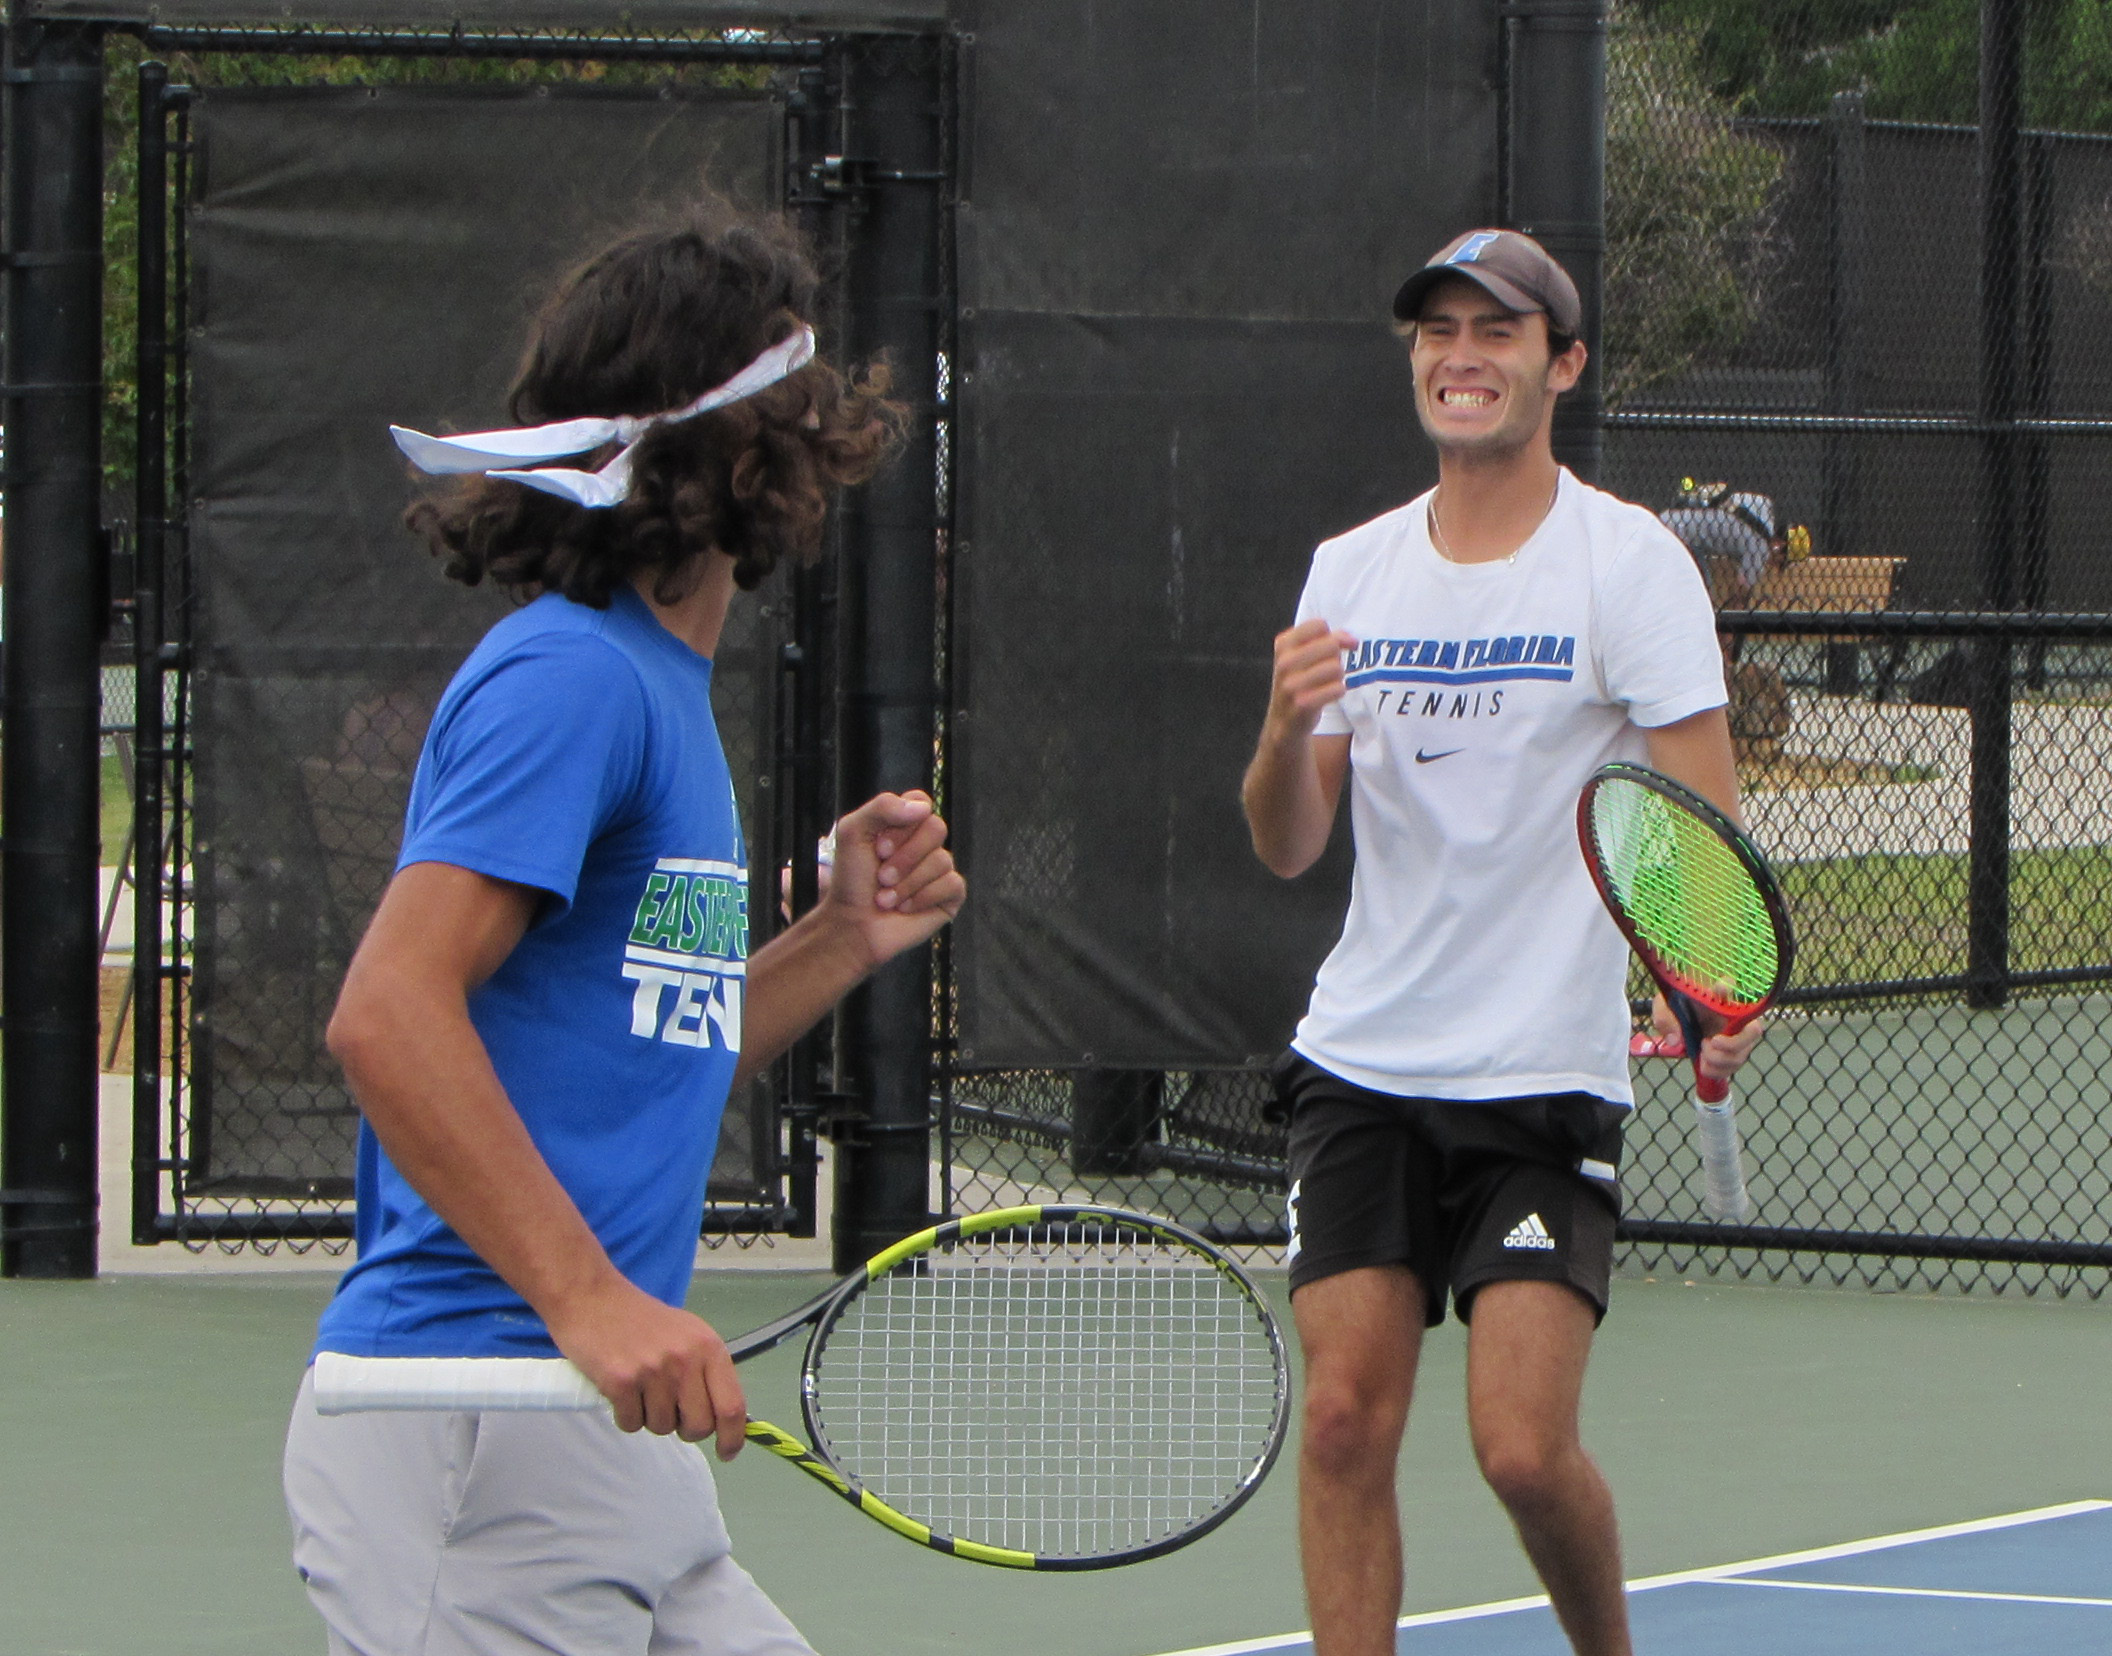 Men's tennis team has perfect day at national tournament